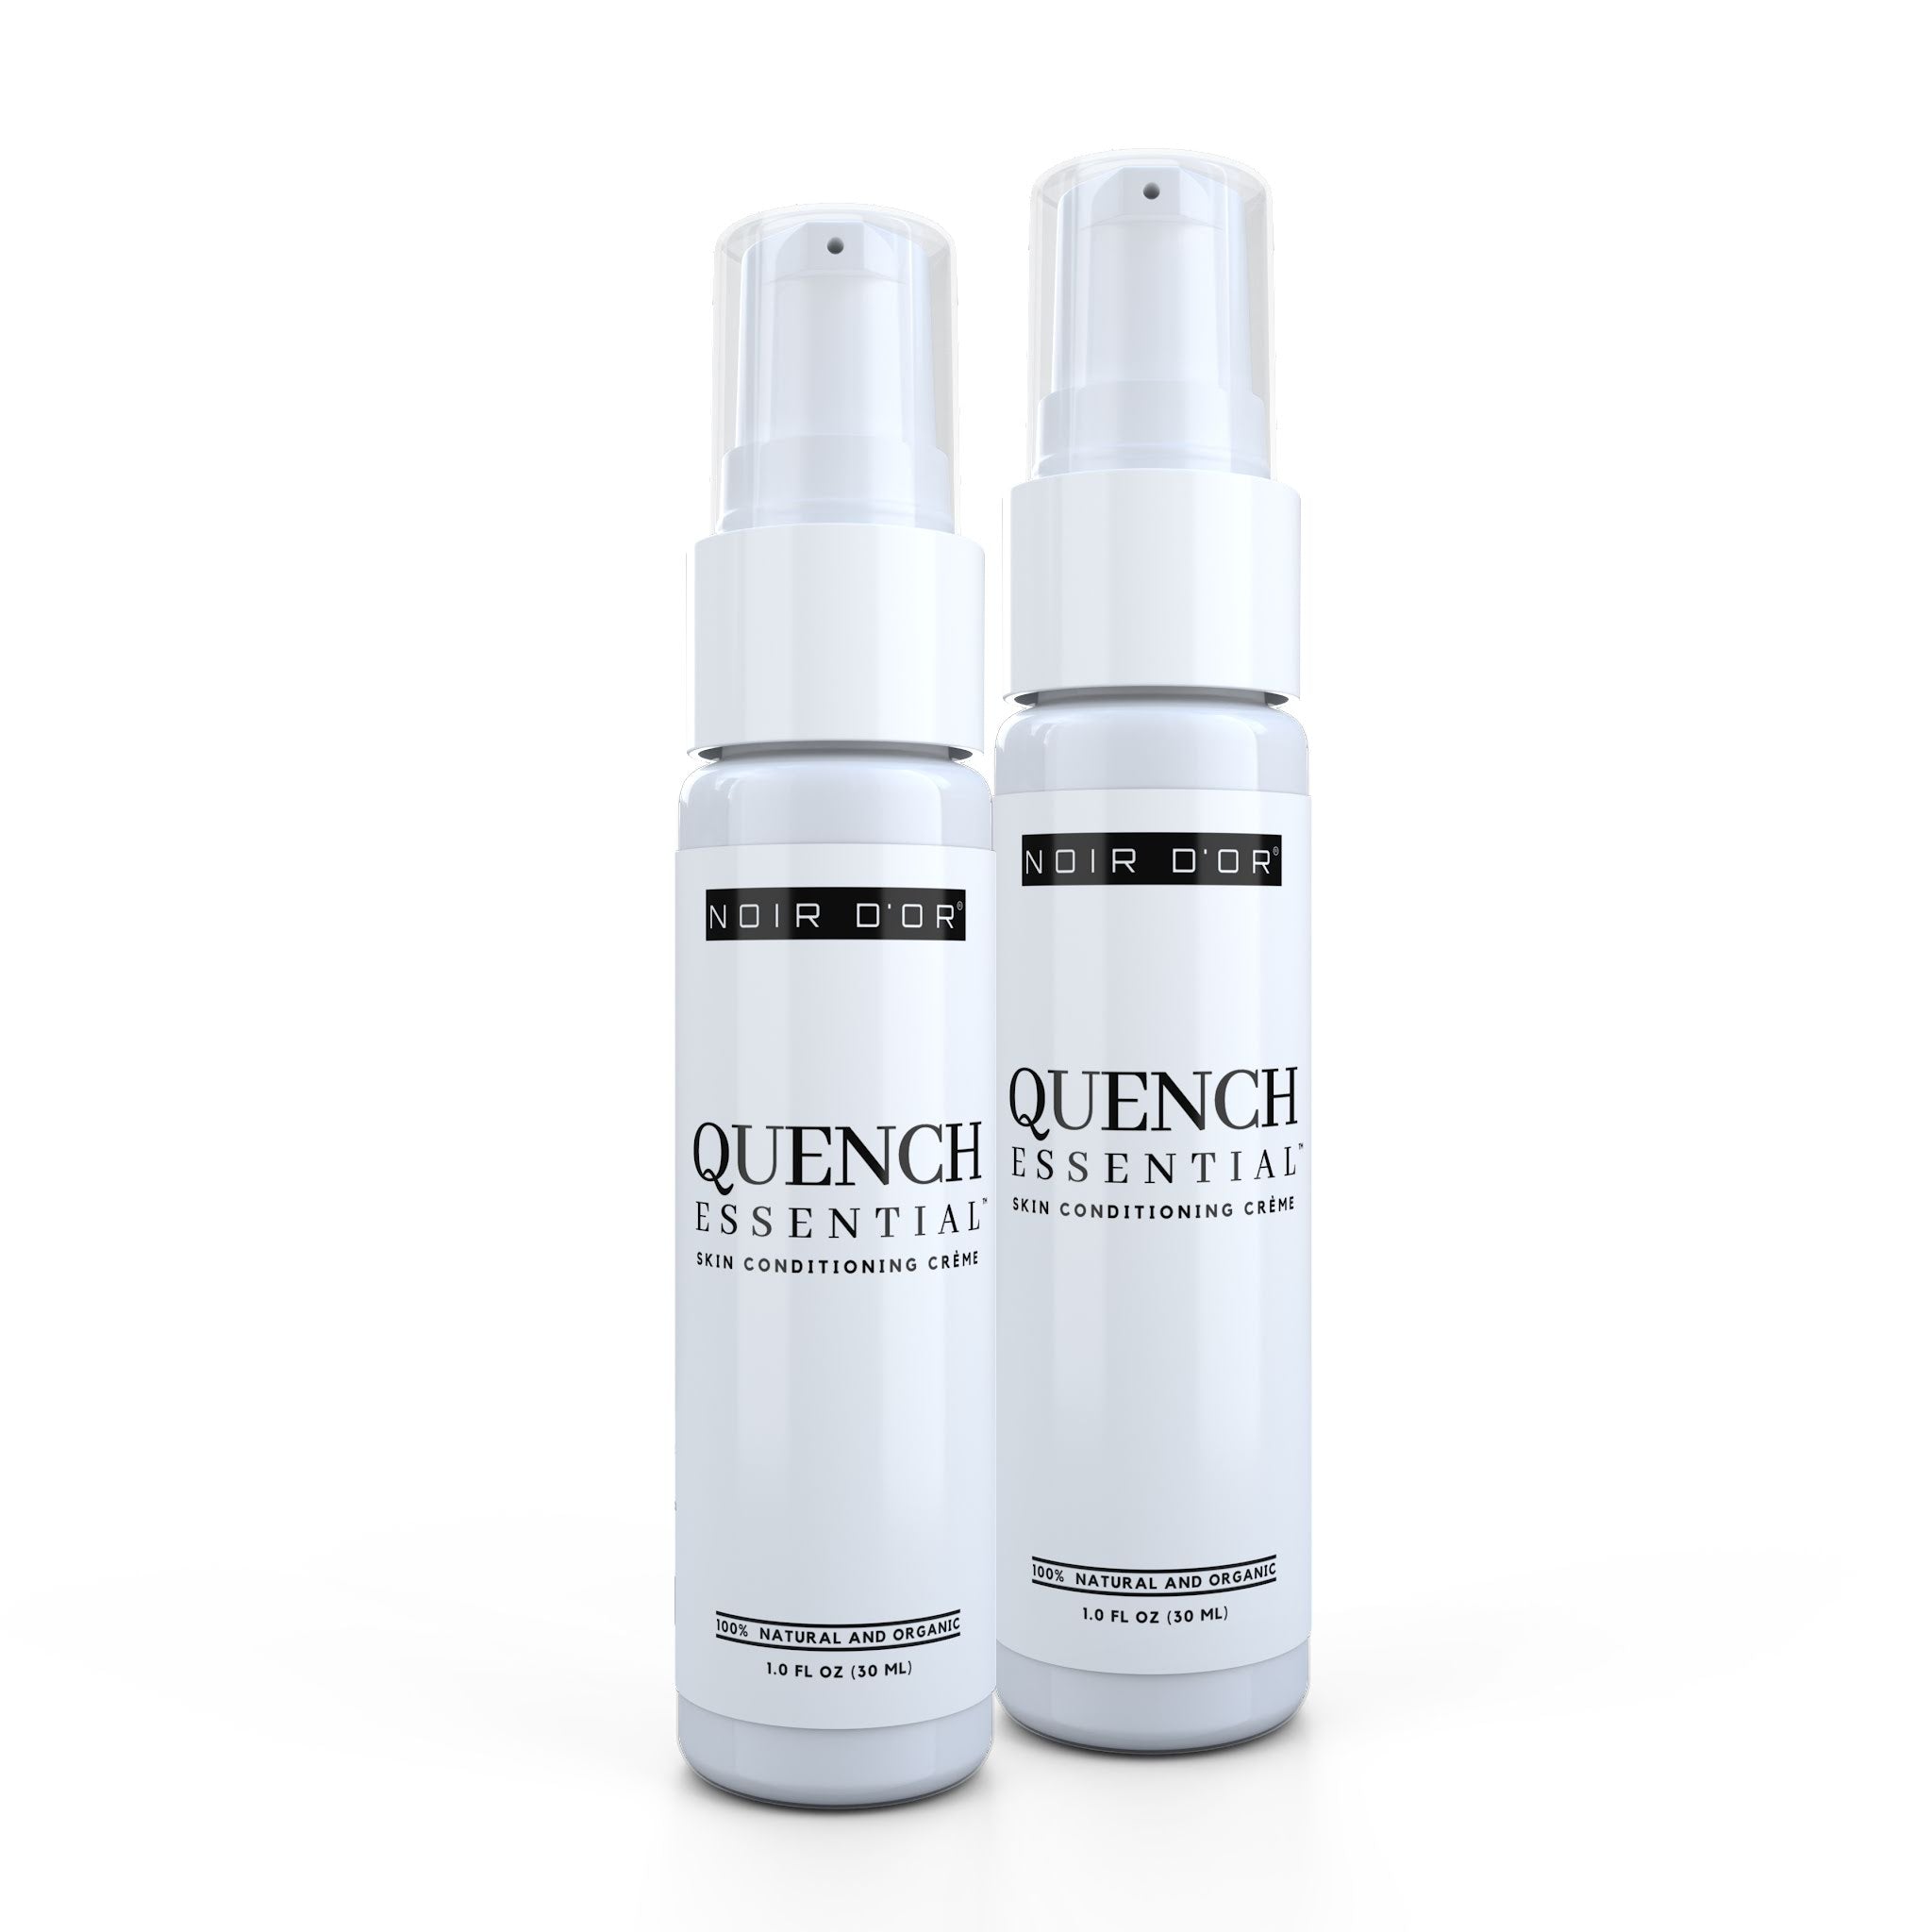 QUENCHESSENTIAL™ Skin Conditioning Crème